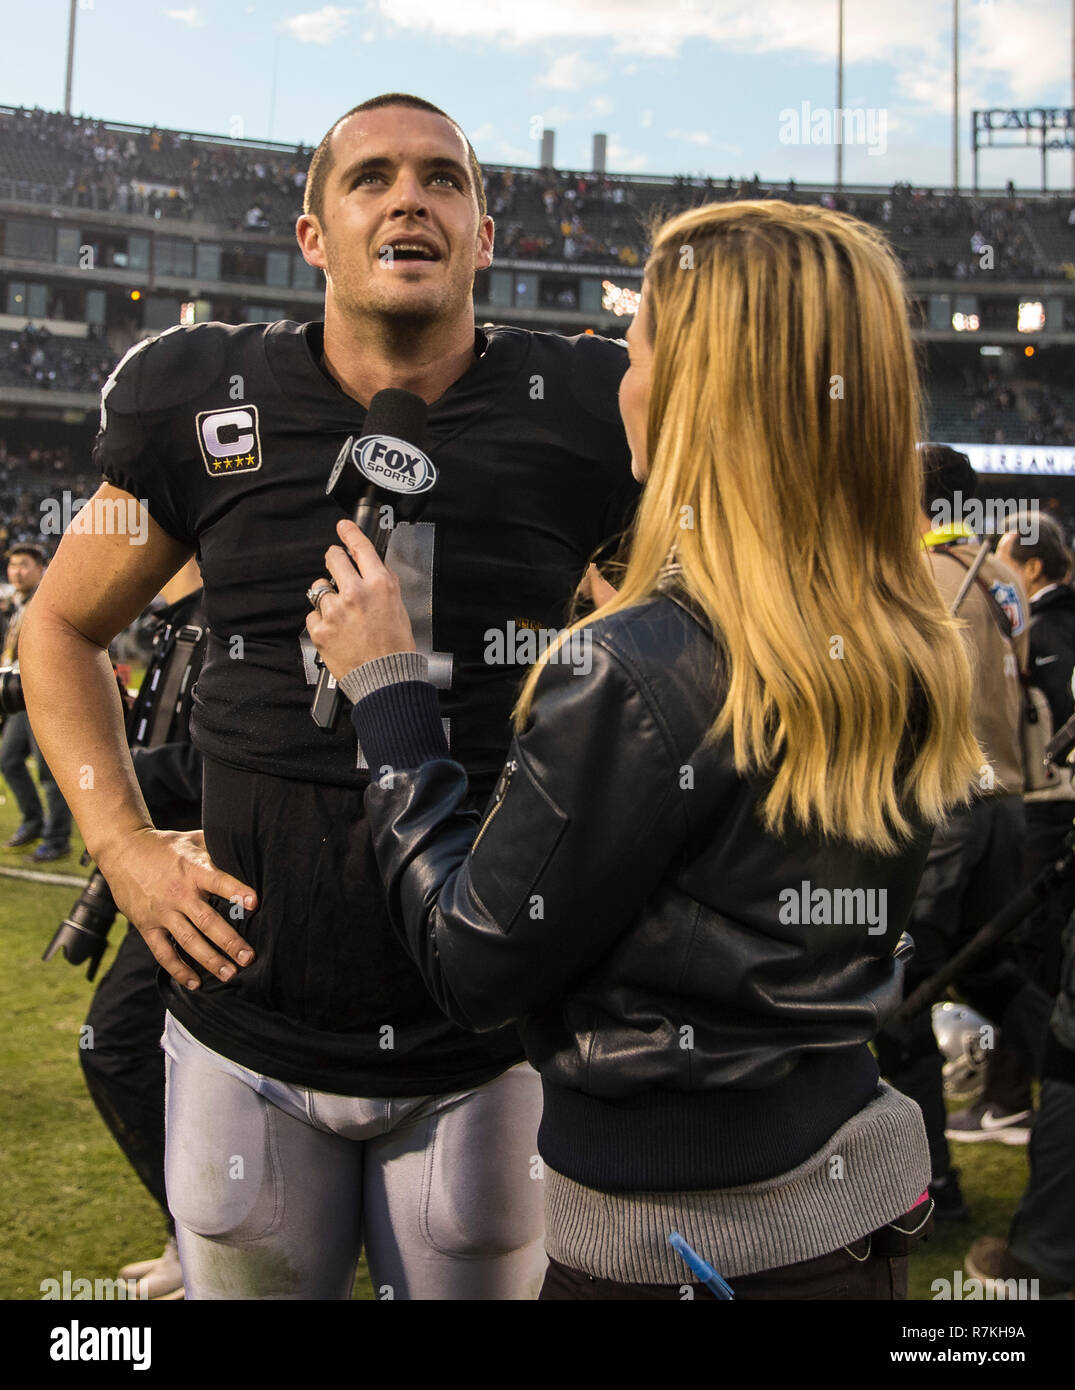 Dec 09 2018 Oakland U.S.A CA Oakland Raiders quarterback Derek Carr (4) with fox sports after the NFL Football game between Pittsburgh Steelers and the Oakland Raiders 24-21 win at O.co Coliseum Stadium Oakland Calif. Thurman James/CSM Stock Photo